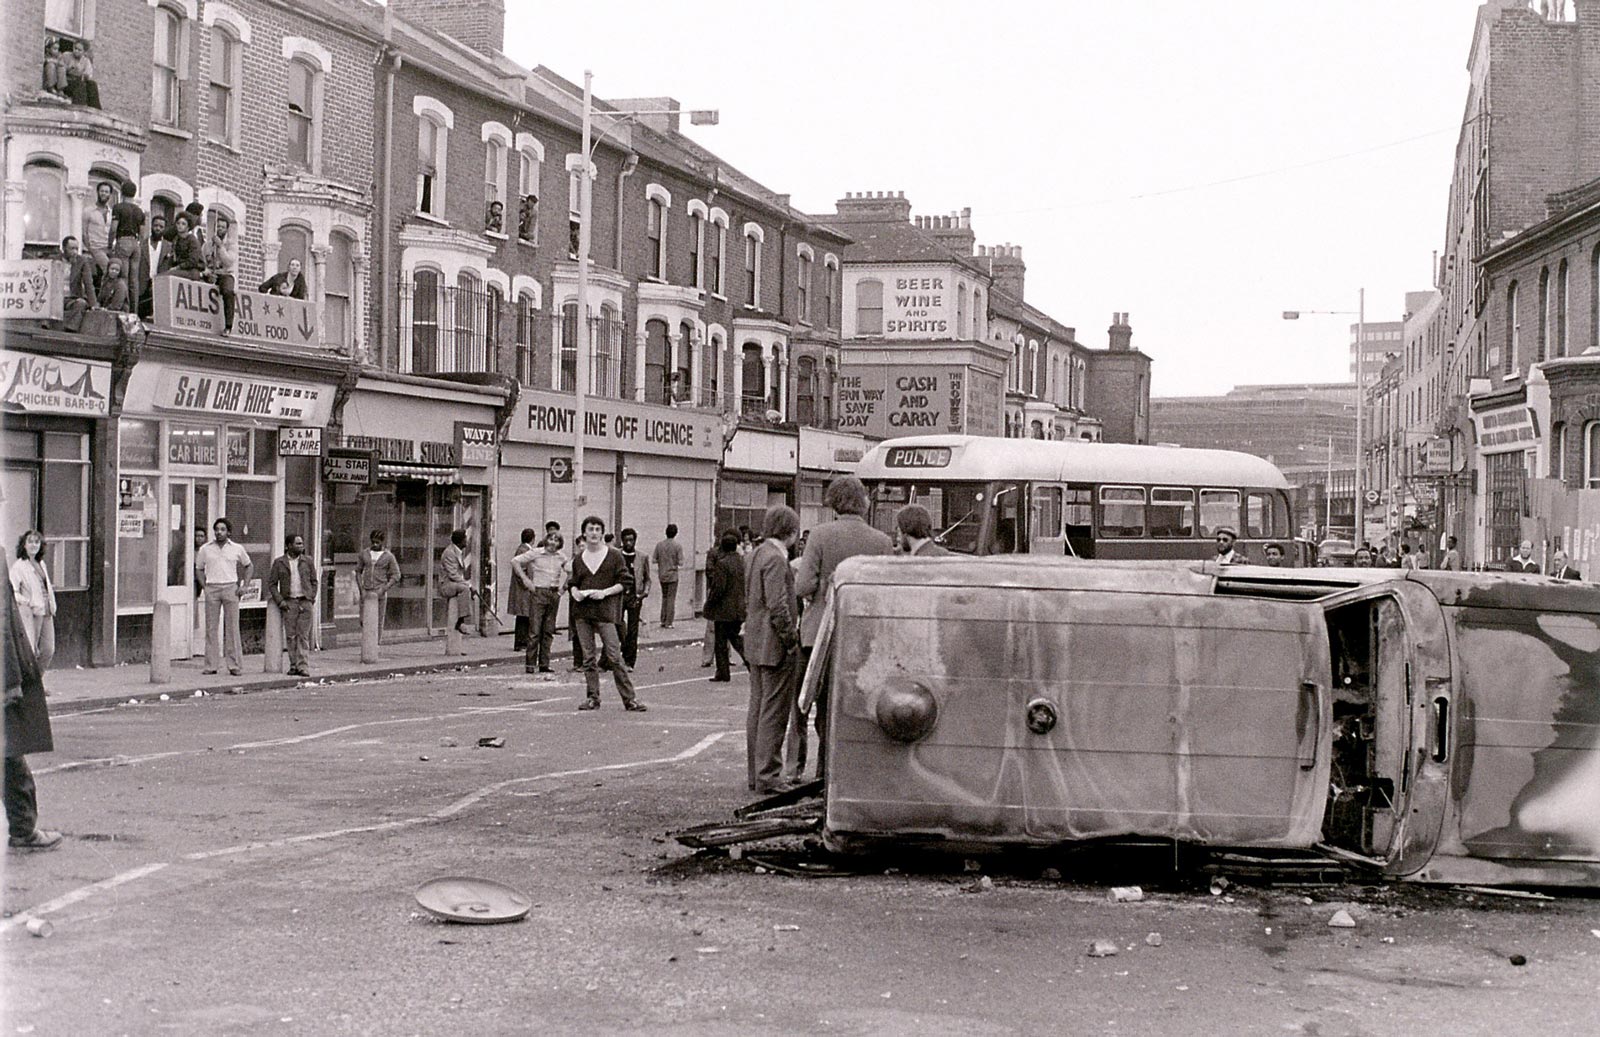 Overturned vehicle in Coldharbour Lane, Brixton, April 1981. The uprising in south London, which lasted from 10 to 12 April, resulted from the Metropolitan Police’s use of “sus” laws to stop and question some thousand Black residents of the neighborhood in the five days leading up to the unrest.